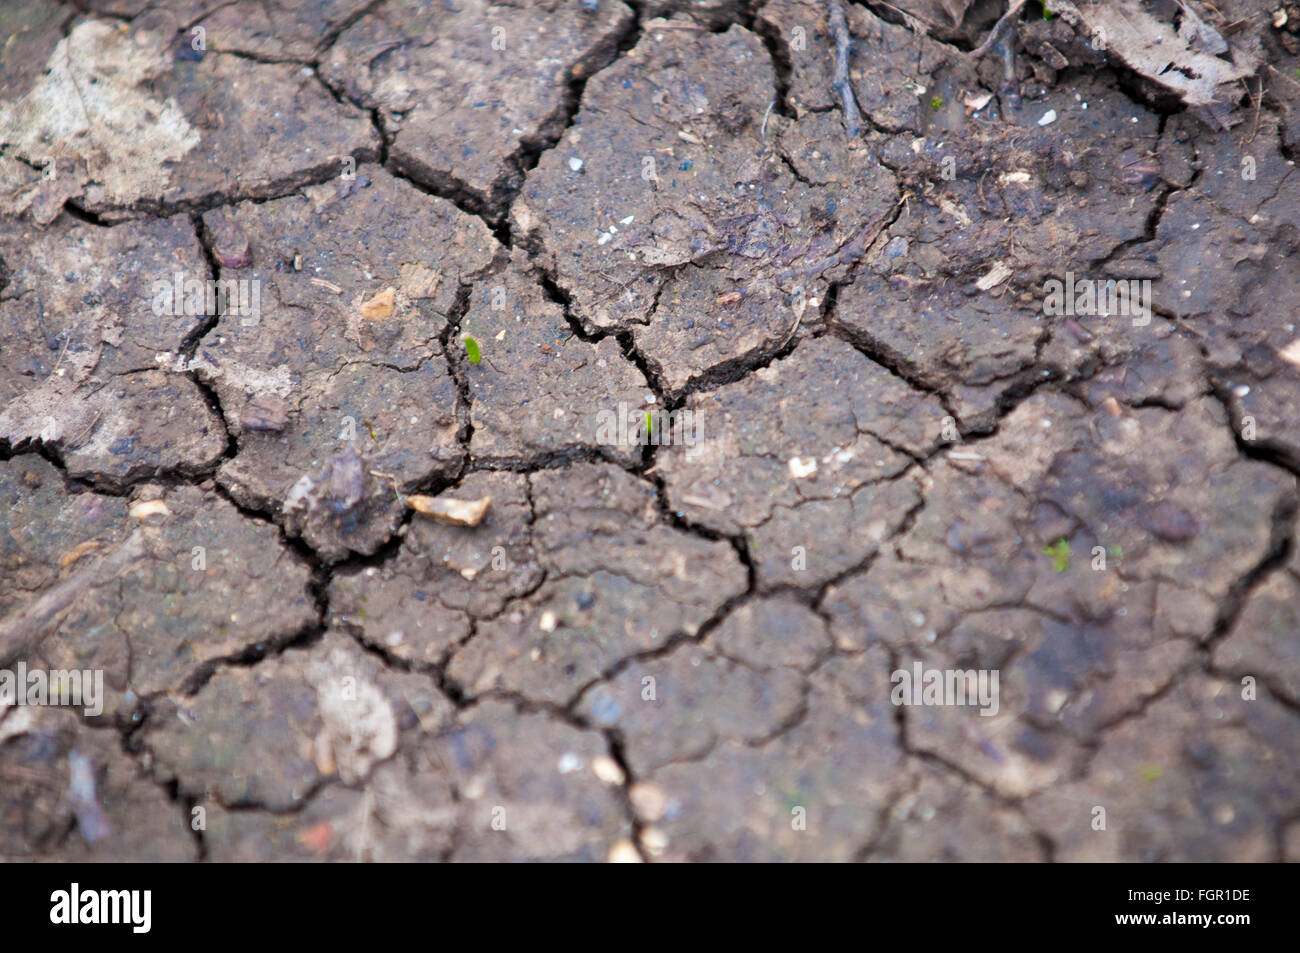 Tiny new plant growing from cracked dry earth in the forest Stock Photo